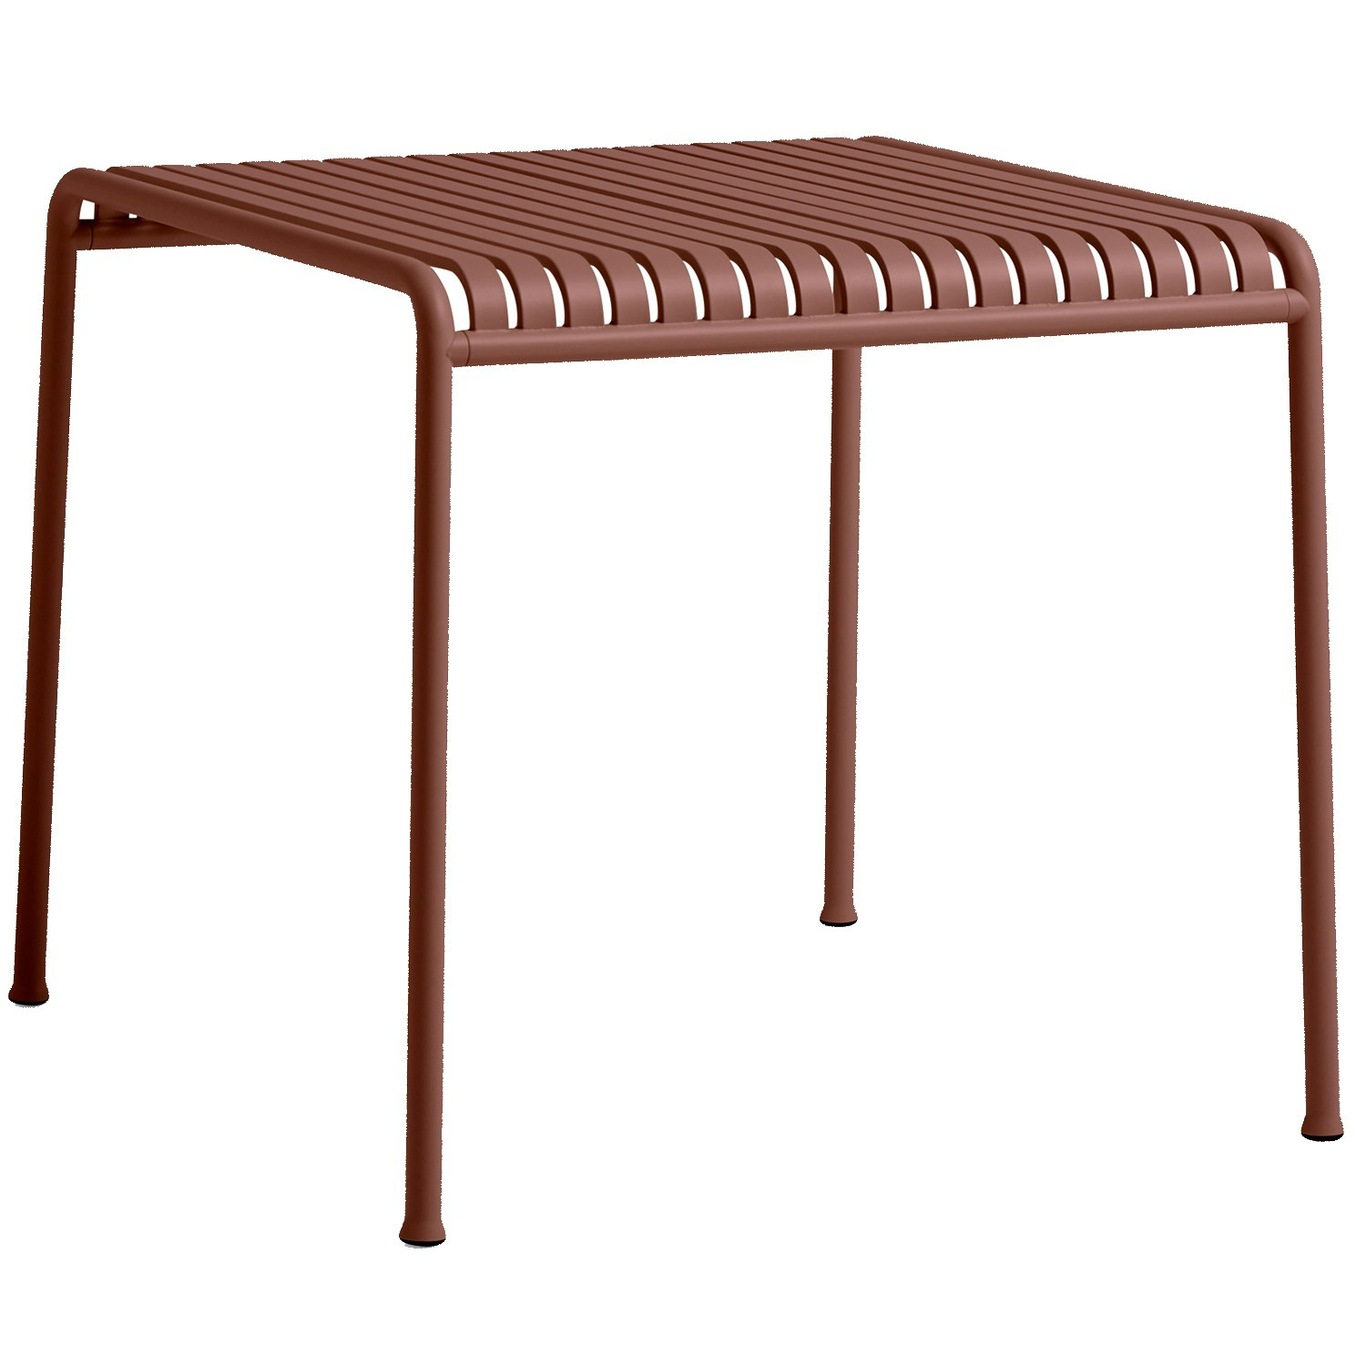 Palissade Table 82,5x90 cm, Iron Red